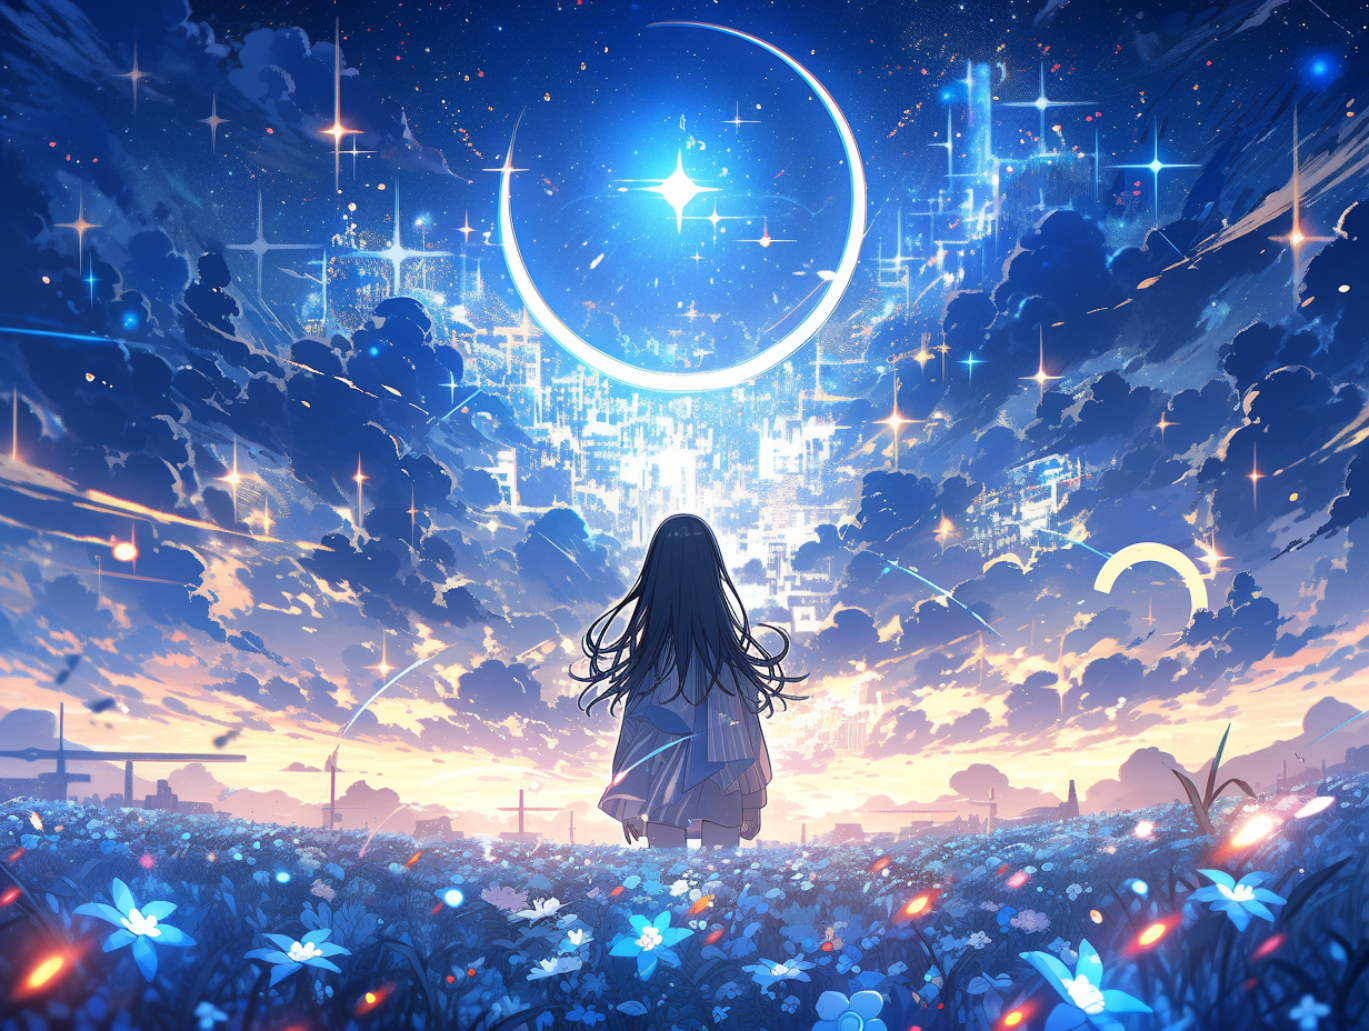 Anime Anime Girls Pixiv Colorful Standing Sky Stars Clouds Flowers Long Hair Leaves Looking Into The 1369x1031